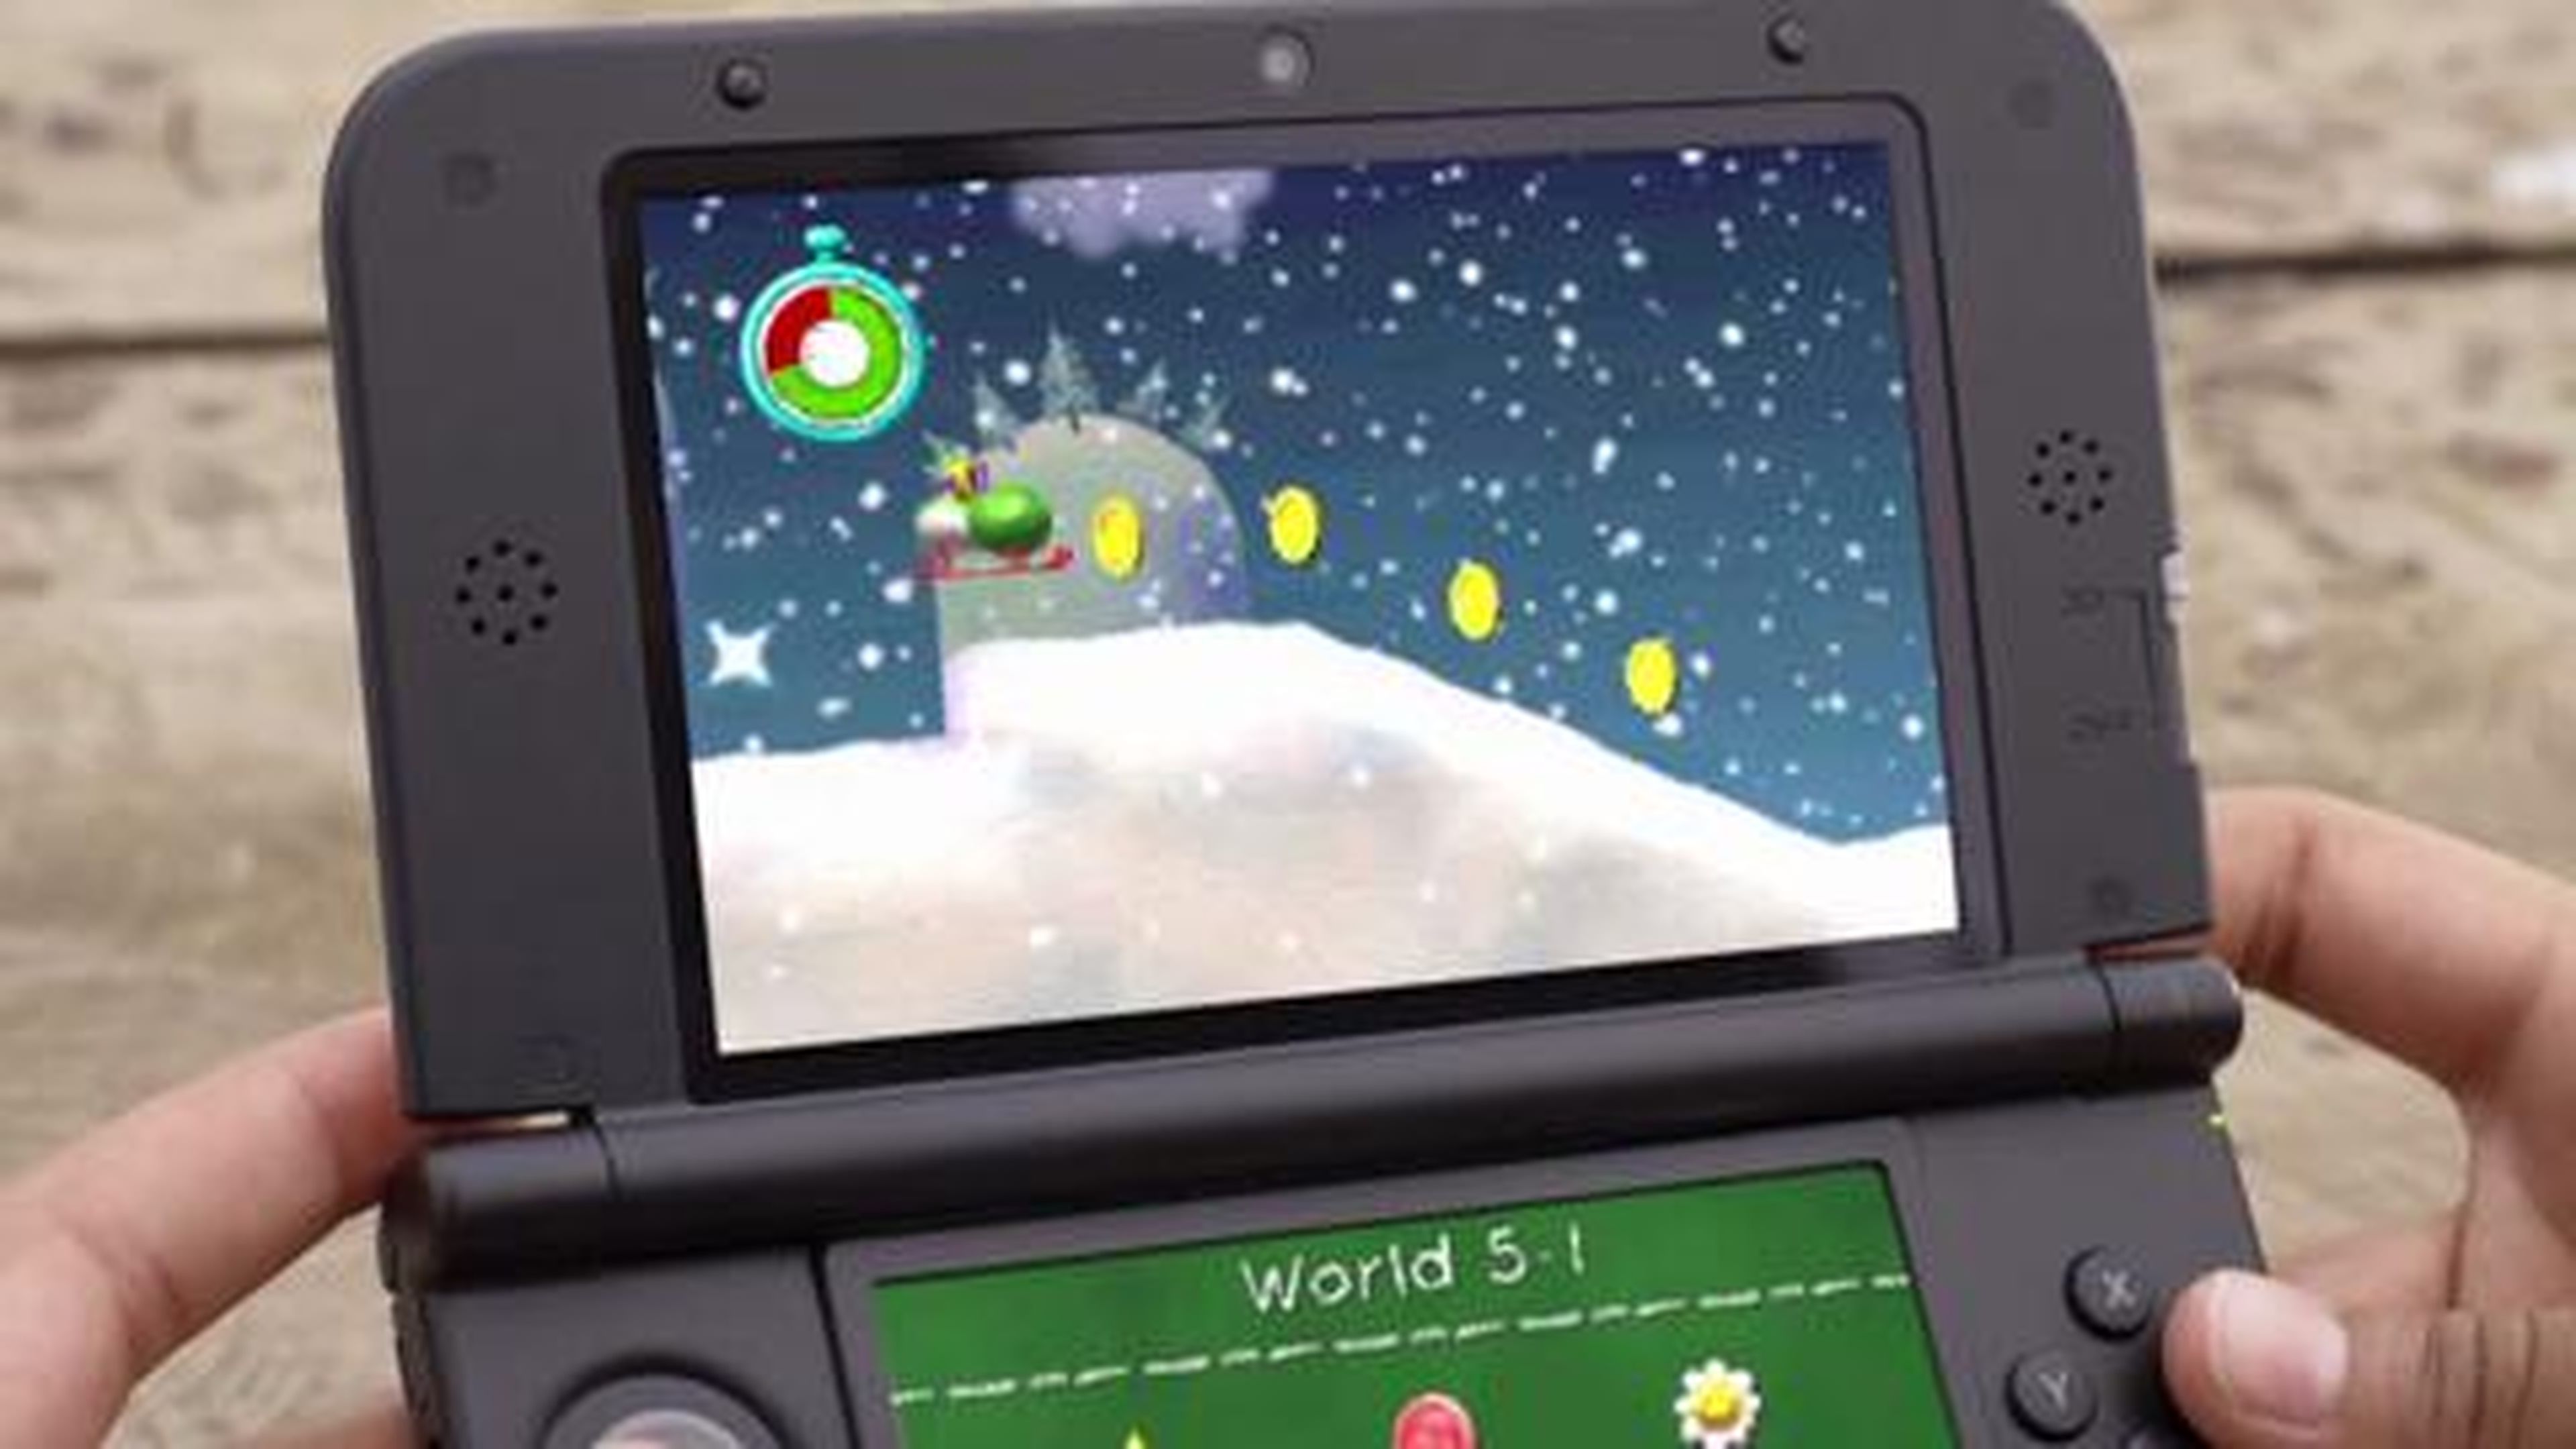 Nintendo 3DS - Yoshi's New Island Commercial